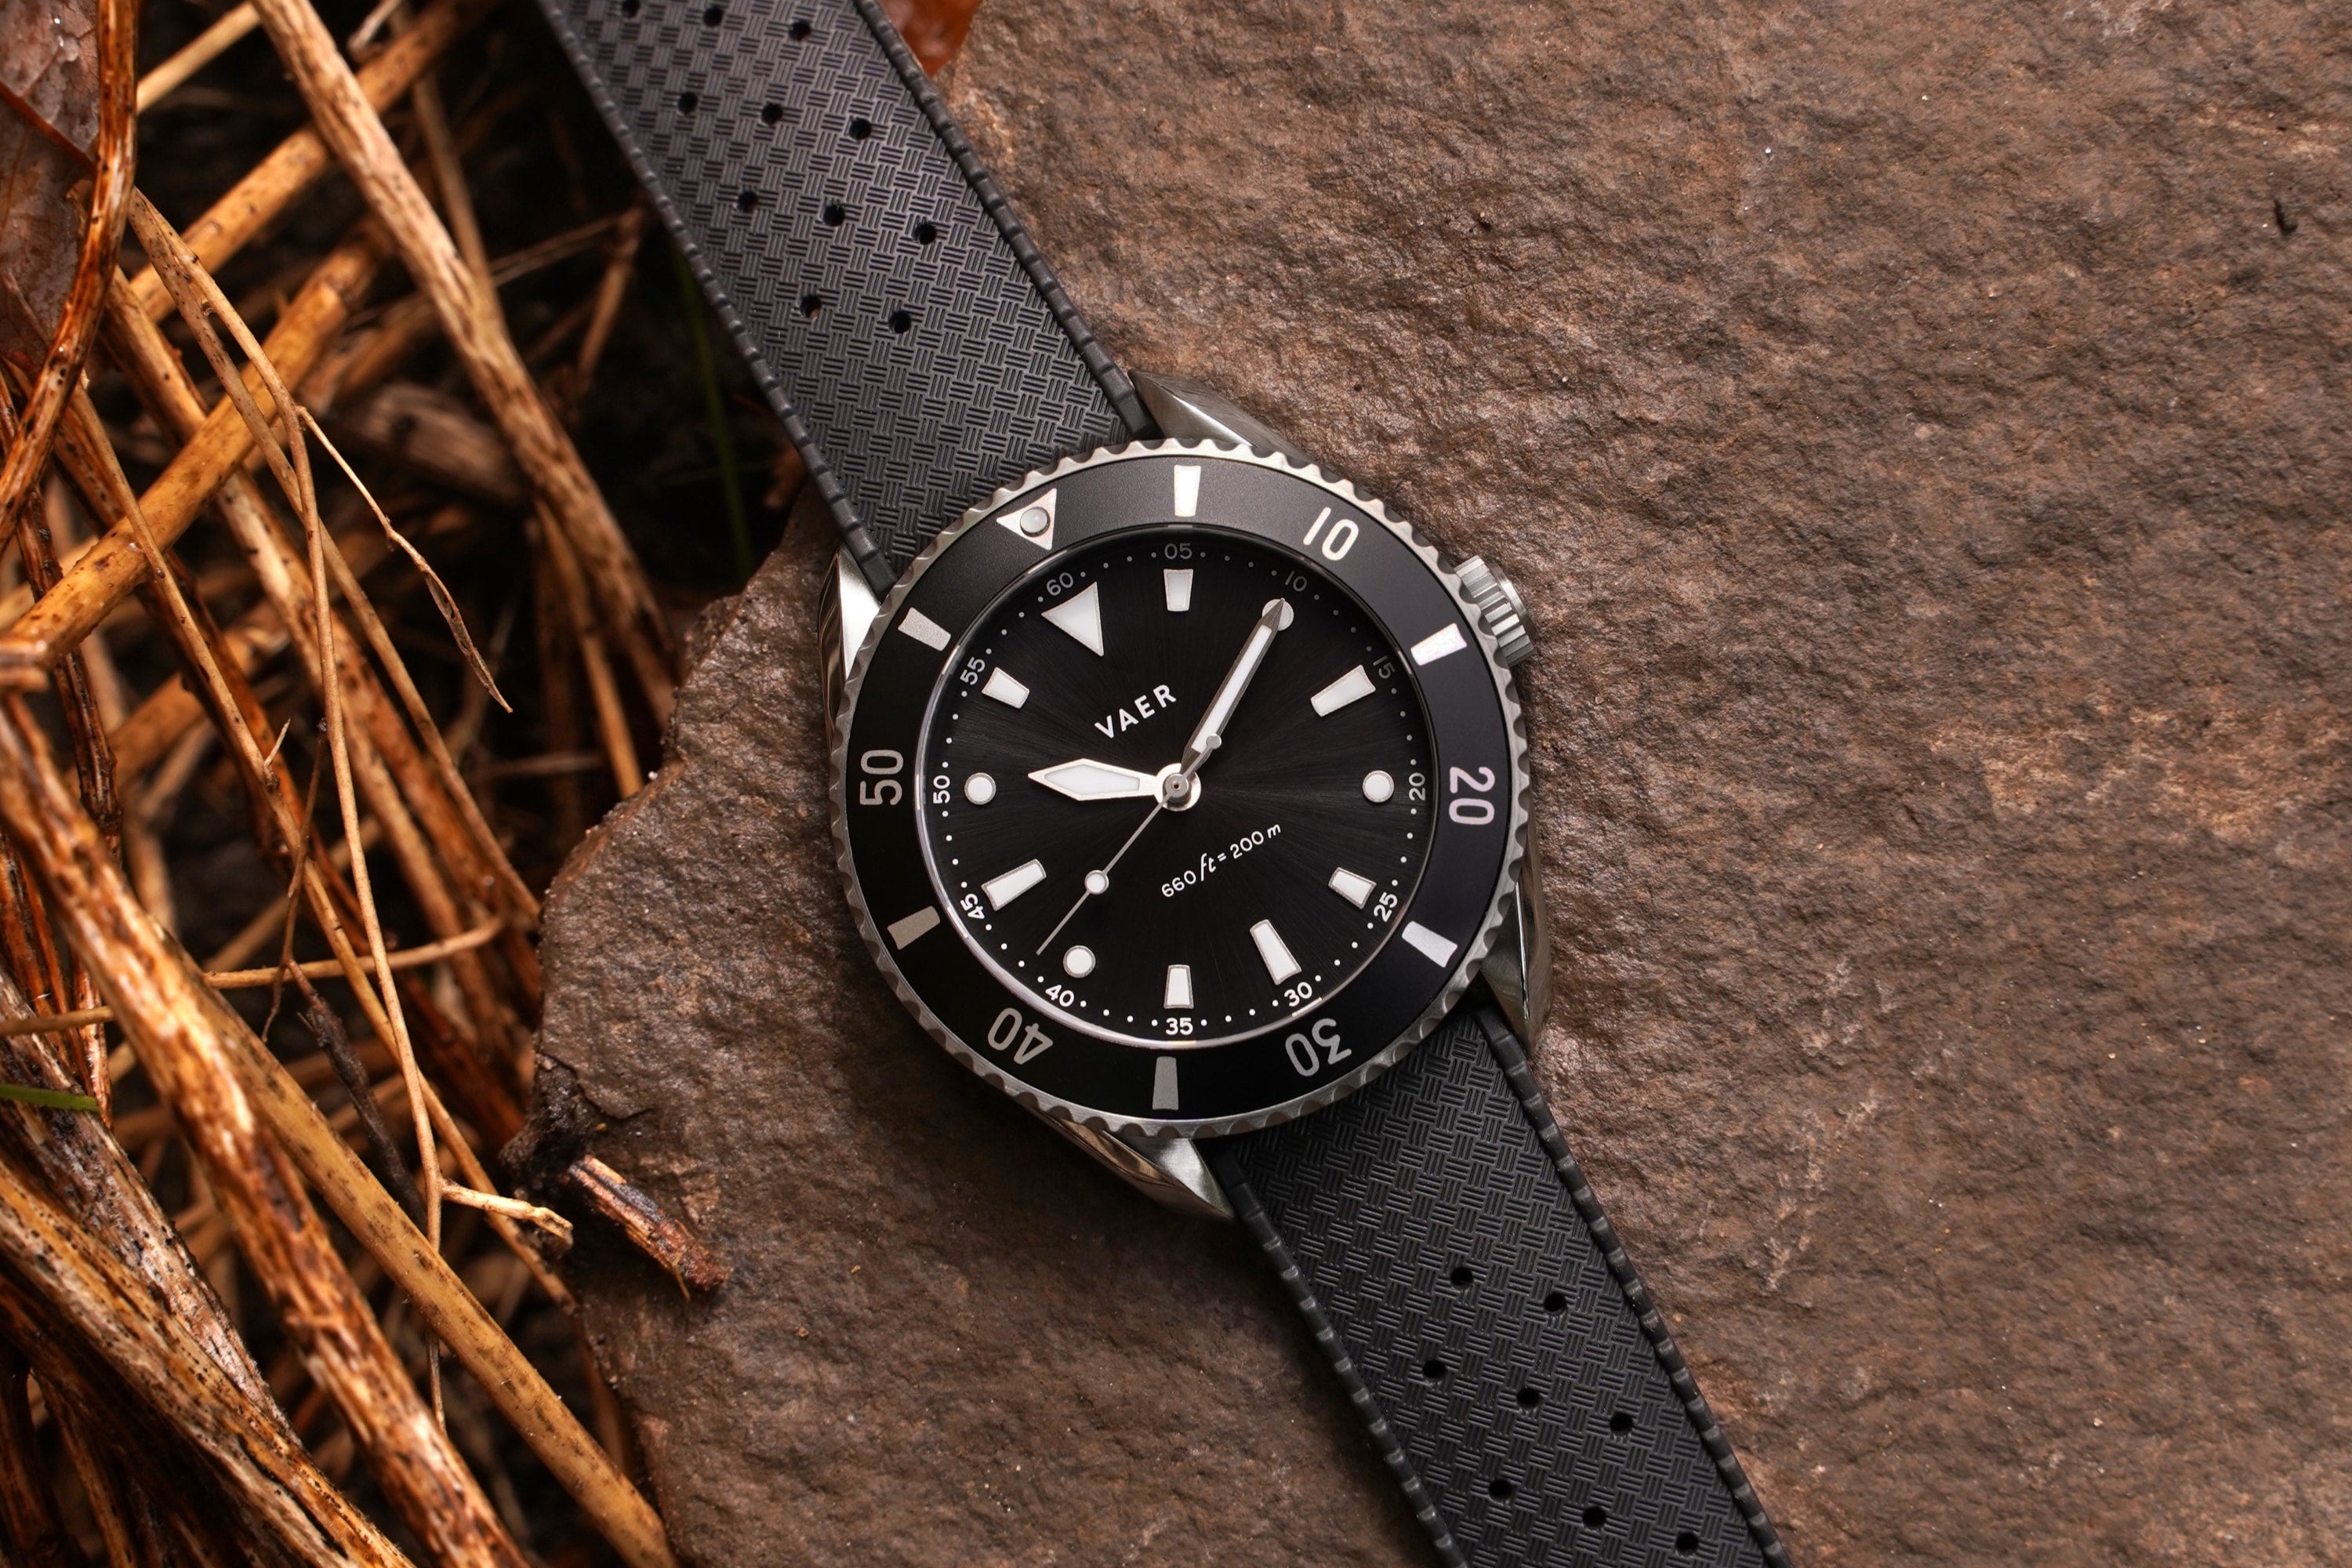 8 Key Features of Vaer Solar Dive Watches